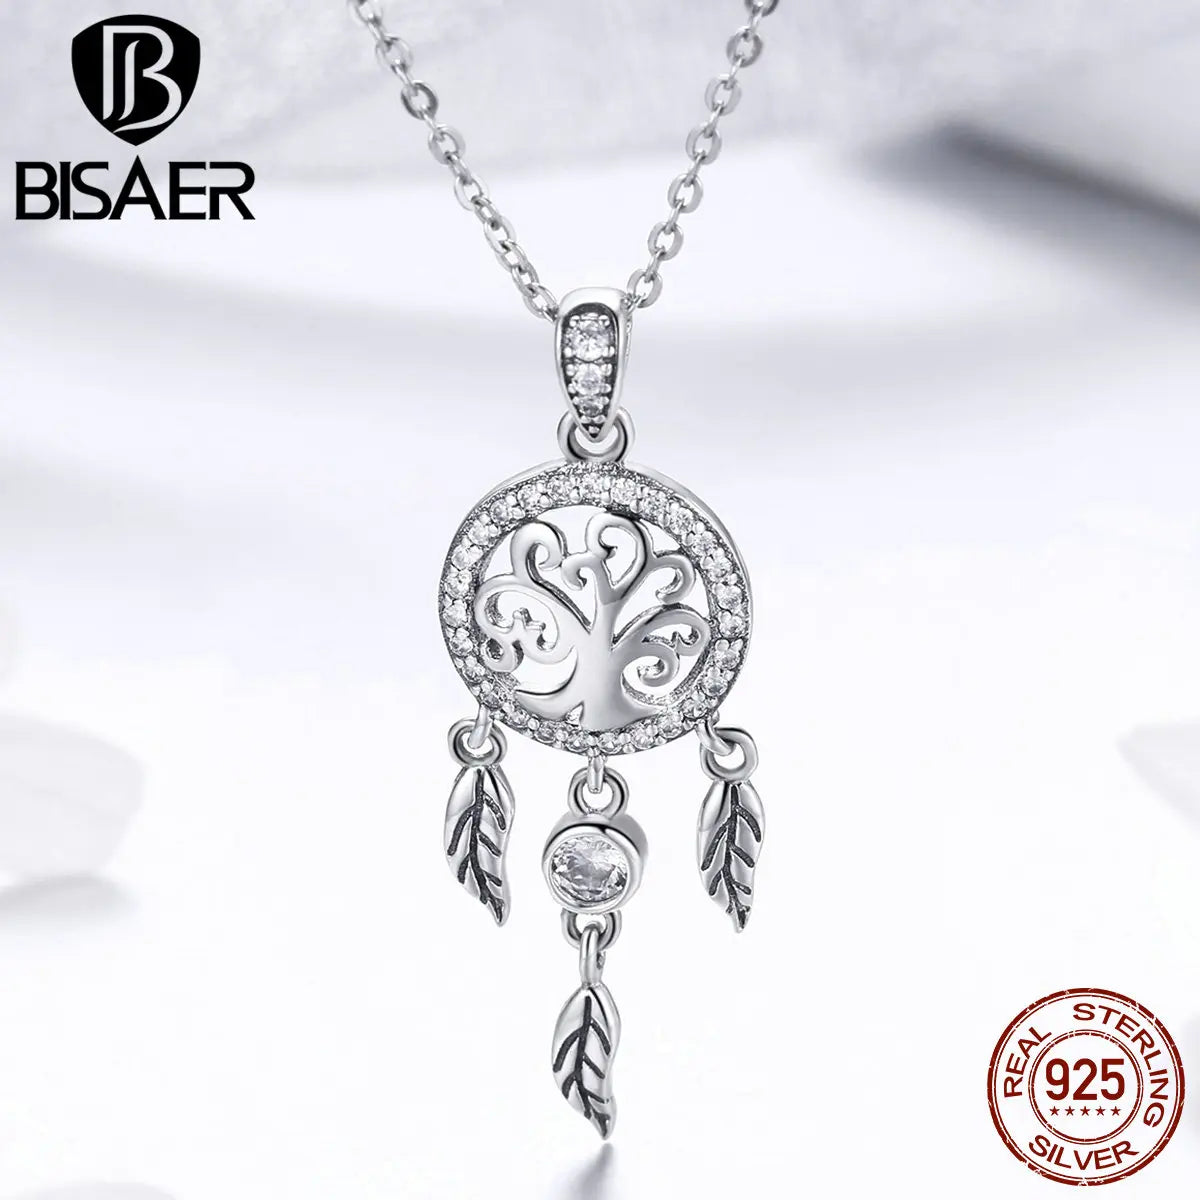 BISAER Vintage 925 Silver Dream Catcher Necklace and Earring Set